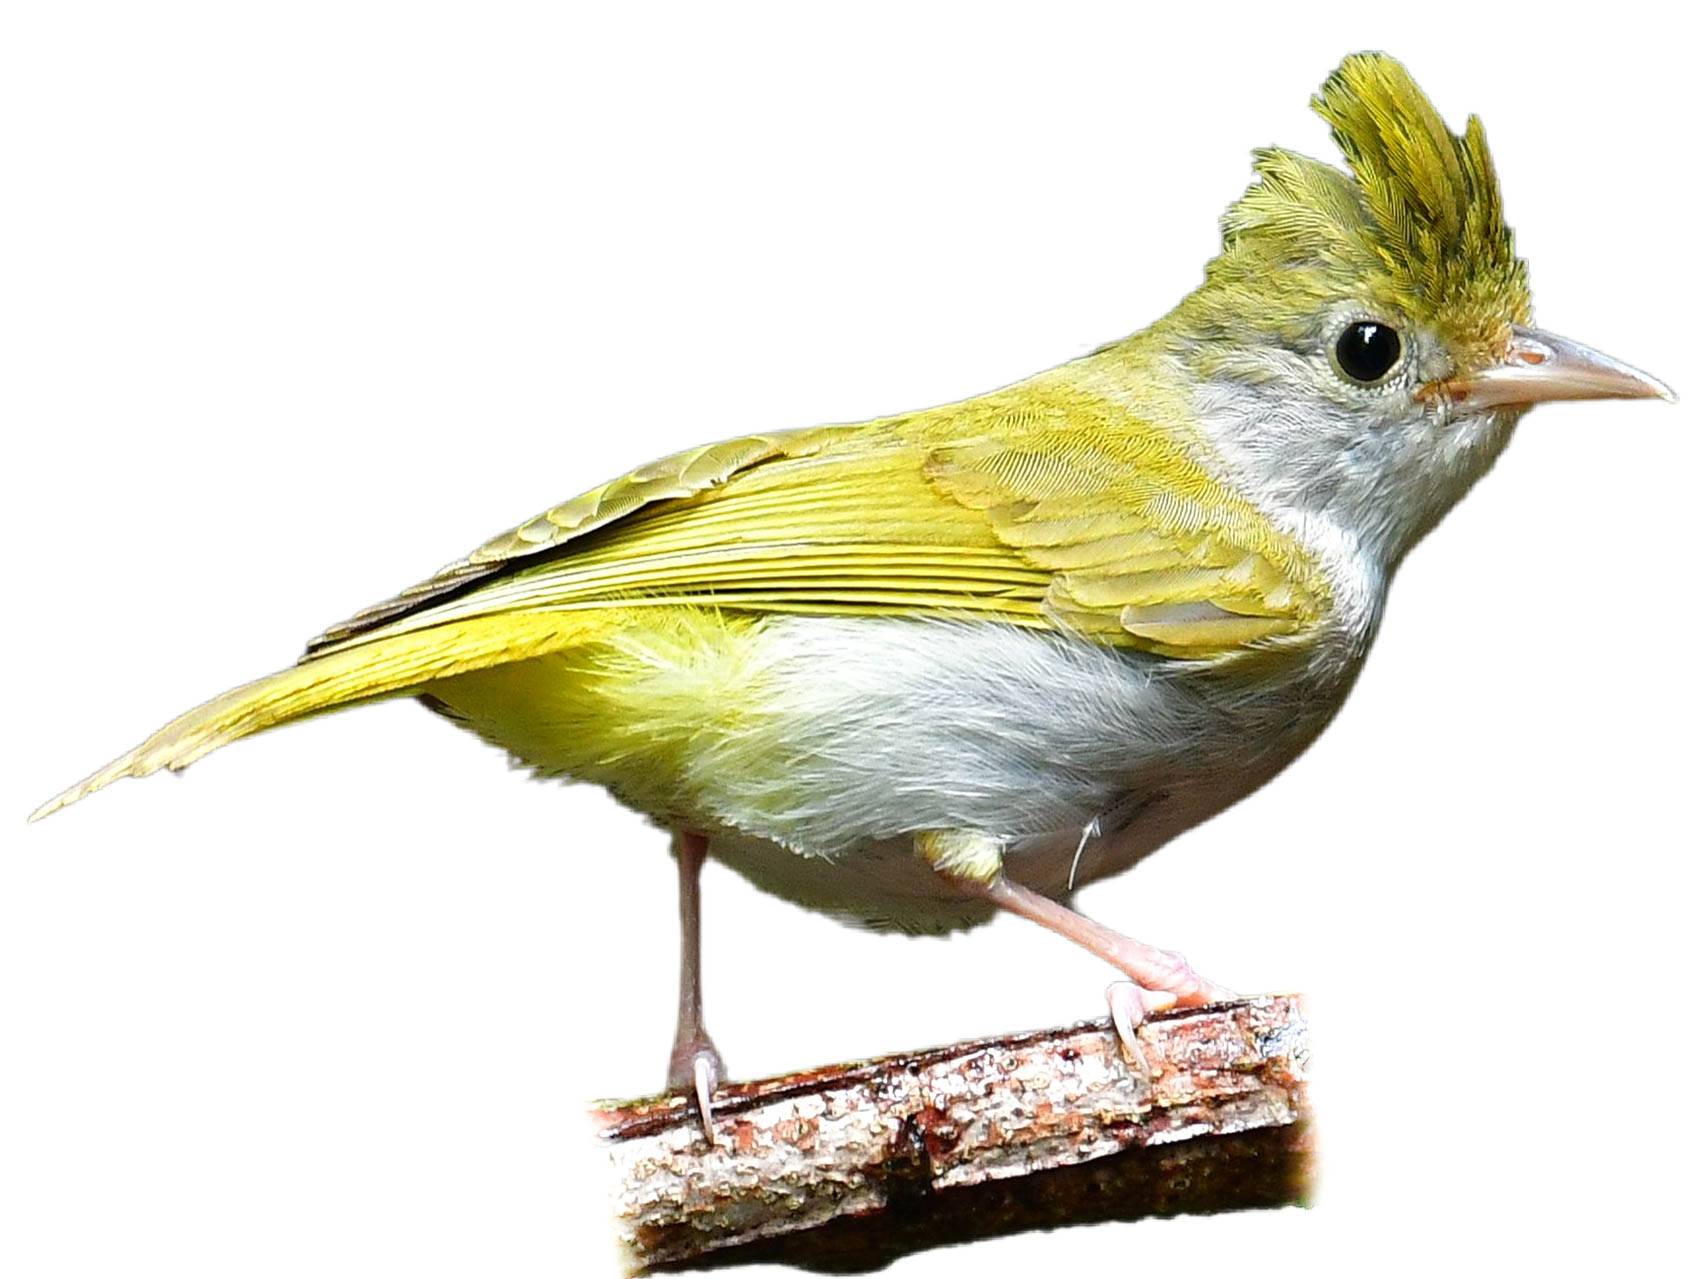 A photo of a White-bellied Erpornis (Erpornis zantholeuca)